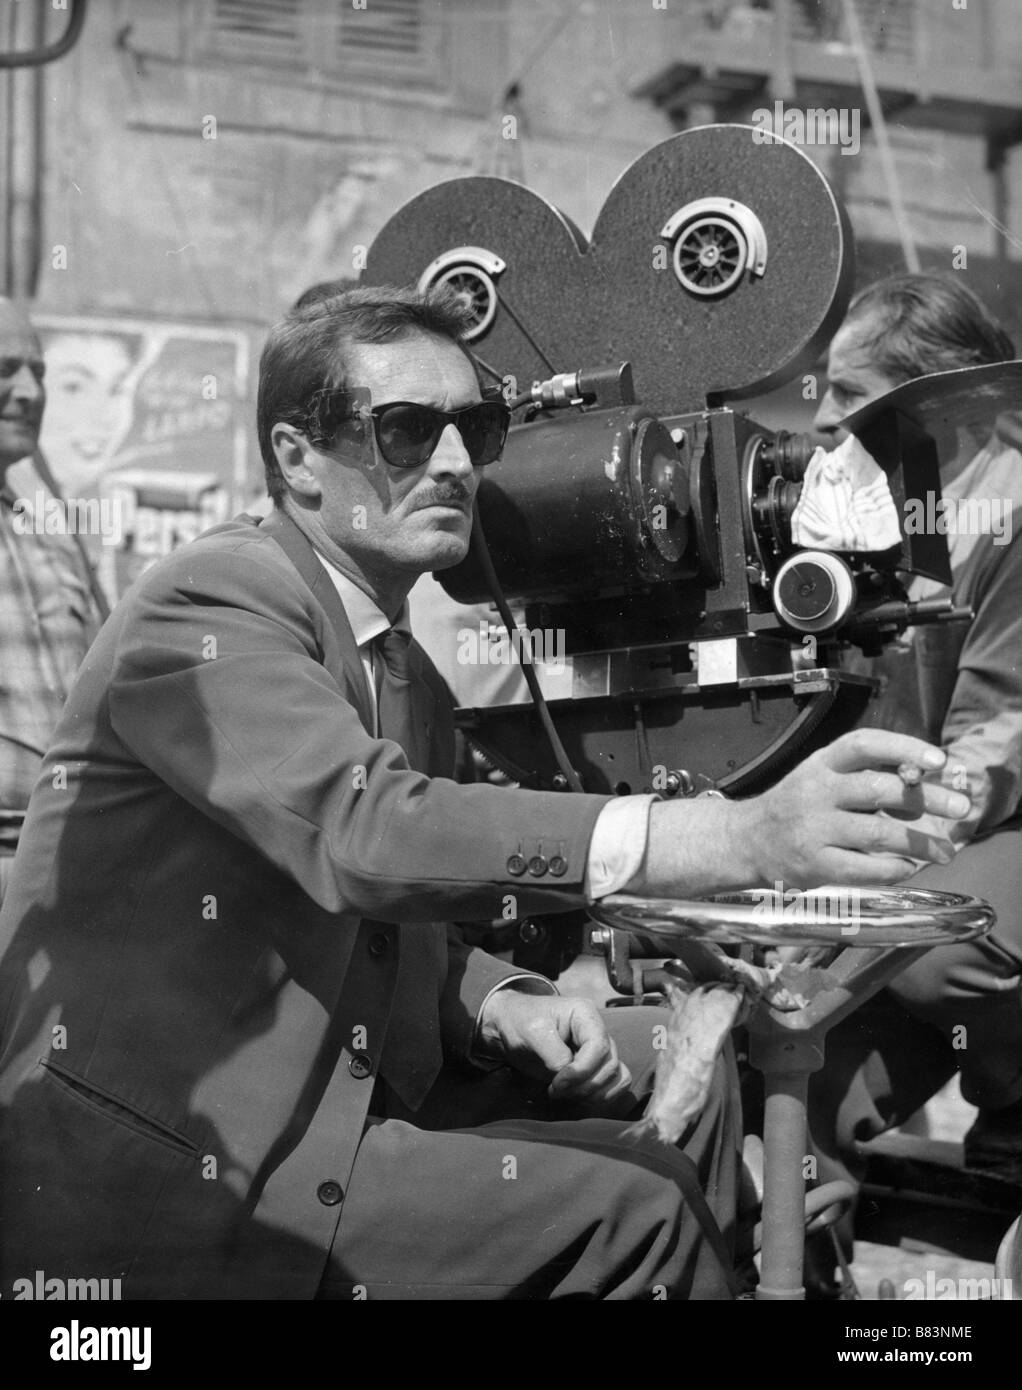 Pietro Germi Pietro Germi Pietro Germi on the set of Ferroviere, Il  Year: 1956 - Italy Tournage 'Le disque rouge' ou 'Le cheminot' Stock Photo